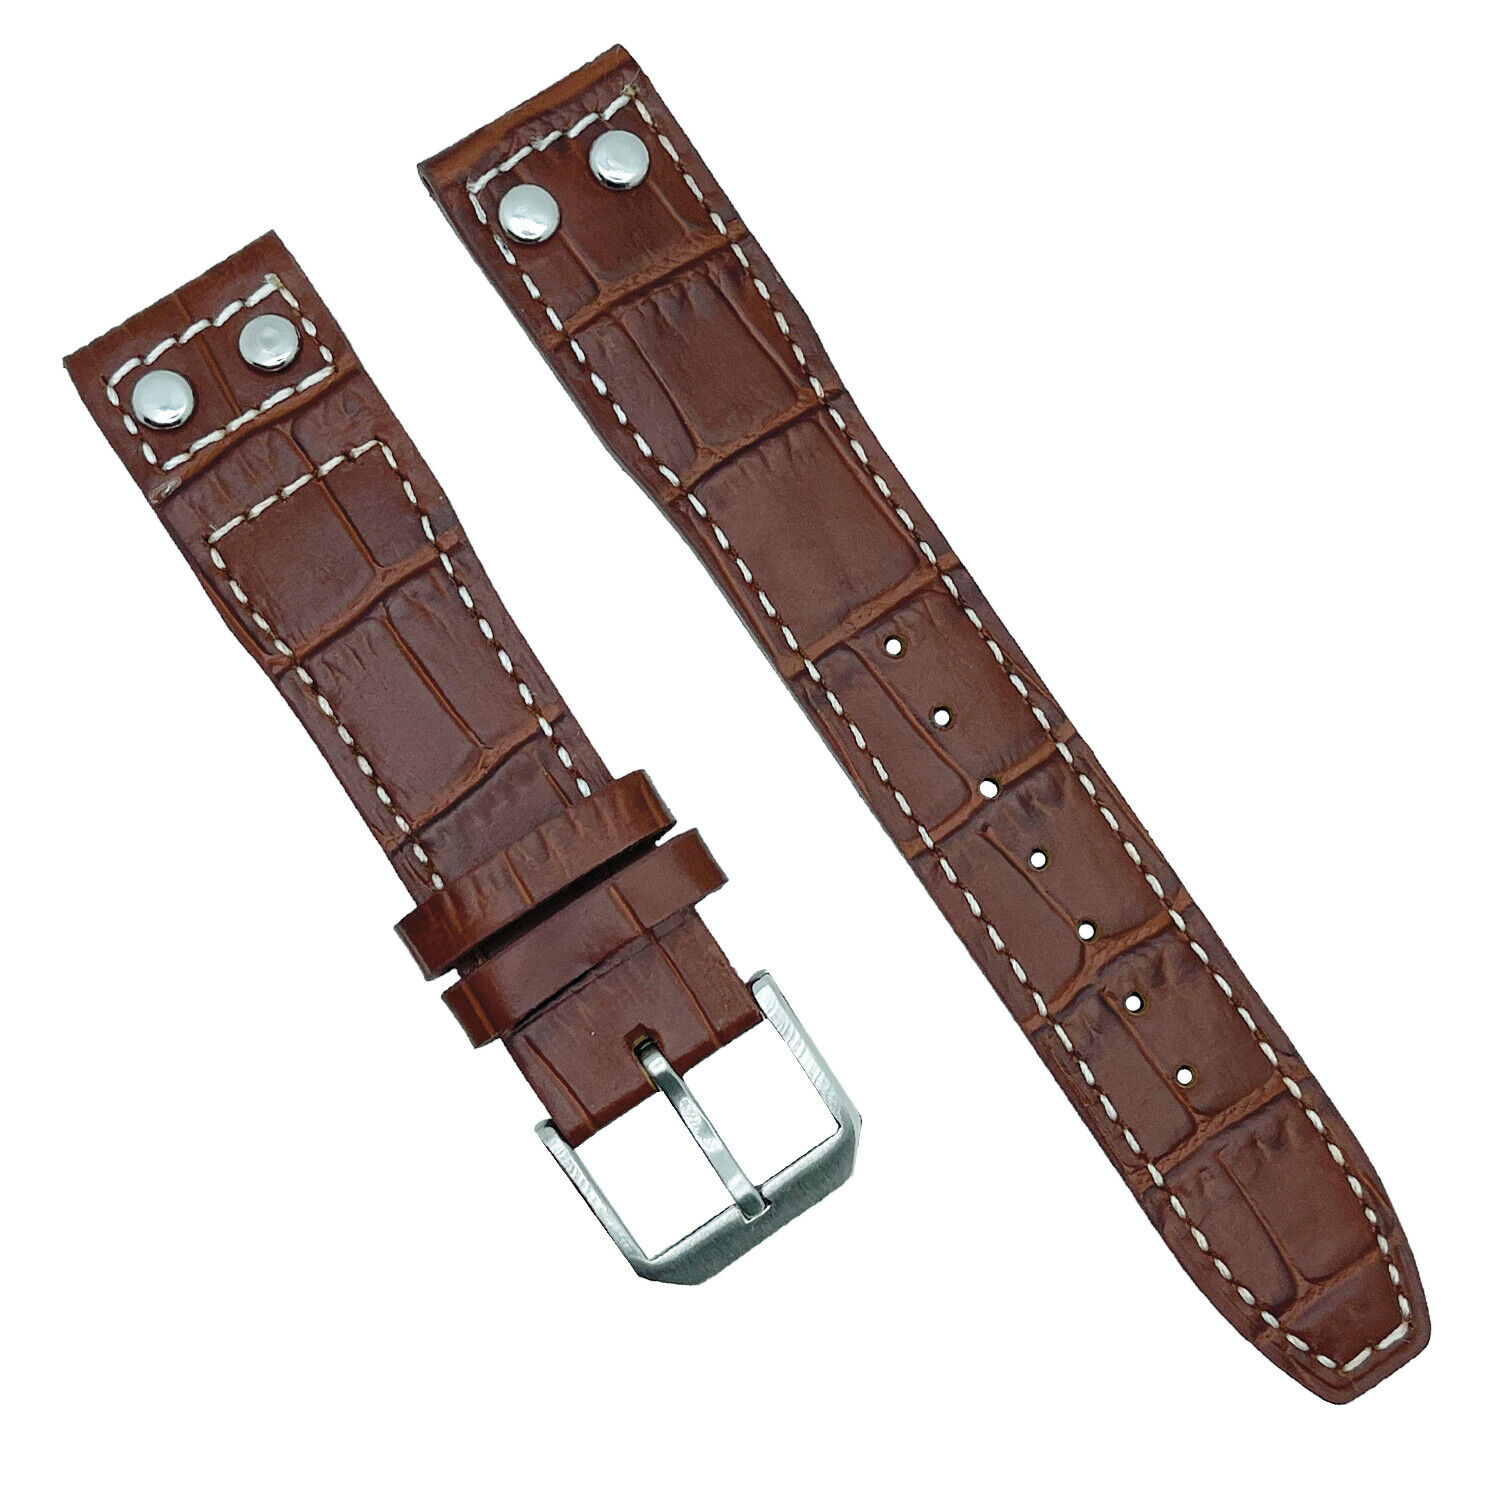 20mm Brown Alligator Embossed Leather Watch Strap Band For IWC Pilot Top Gun